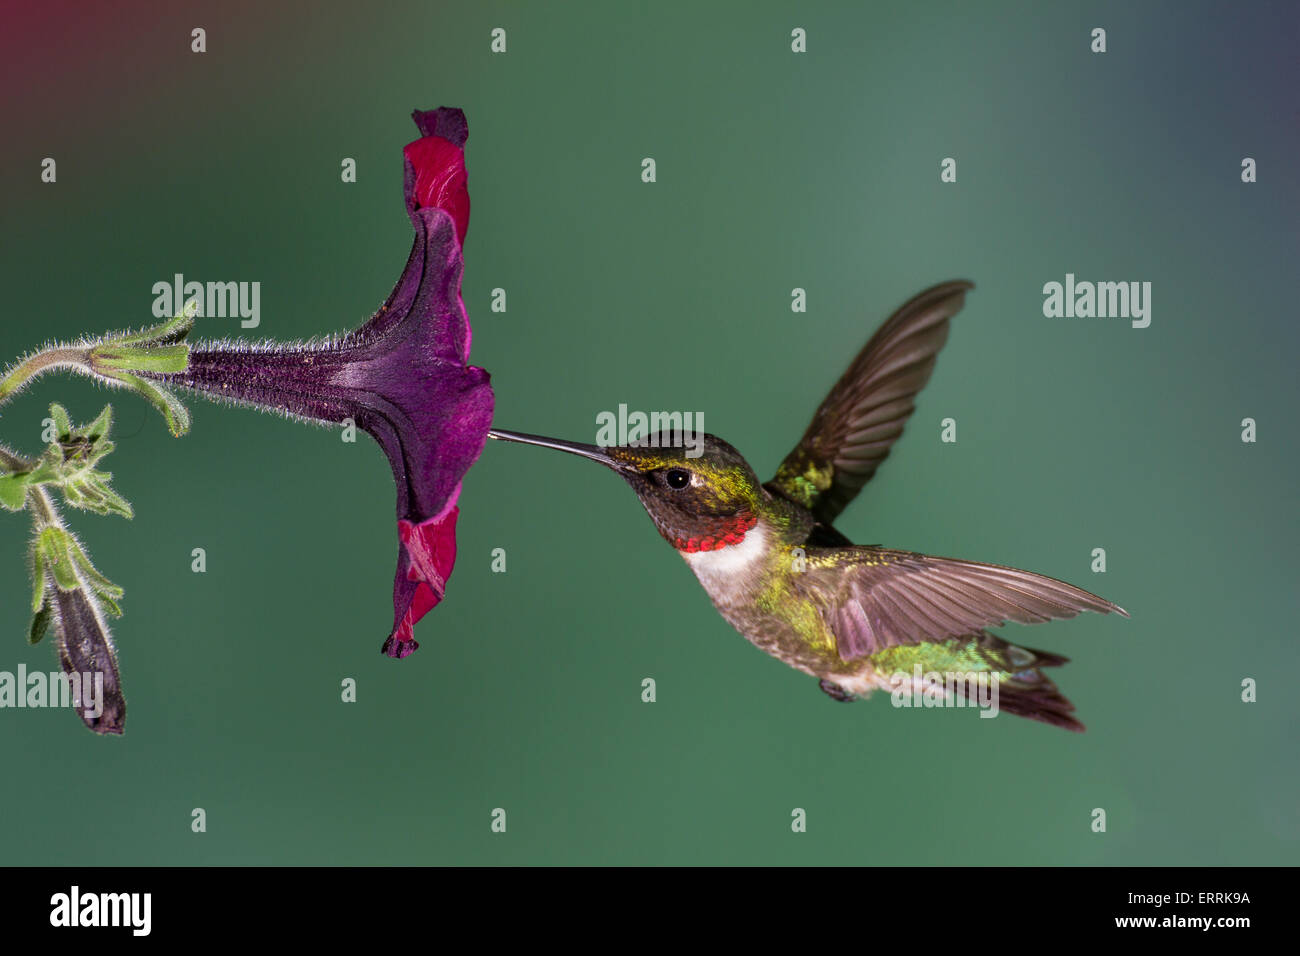 A ruby-throated hummingbird flying into a petunia flower. Stock Photo